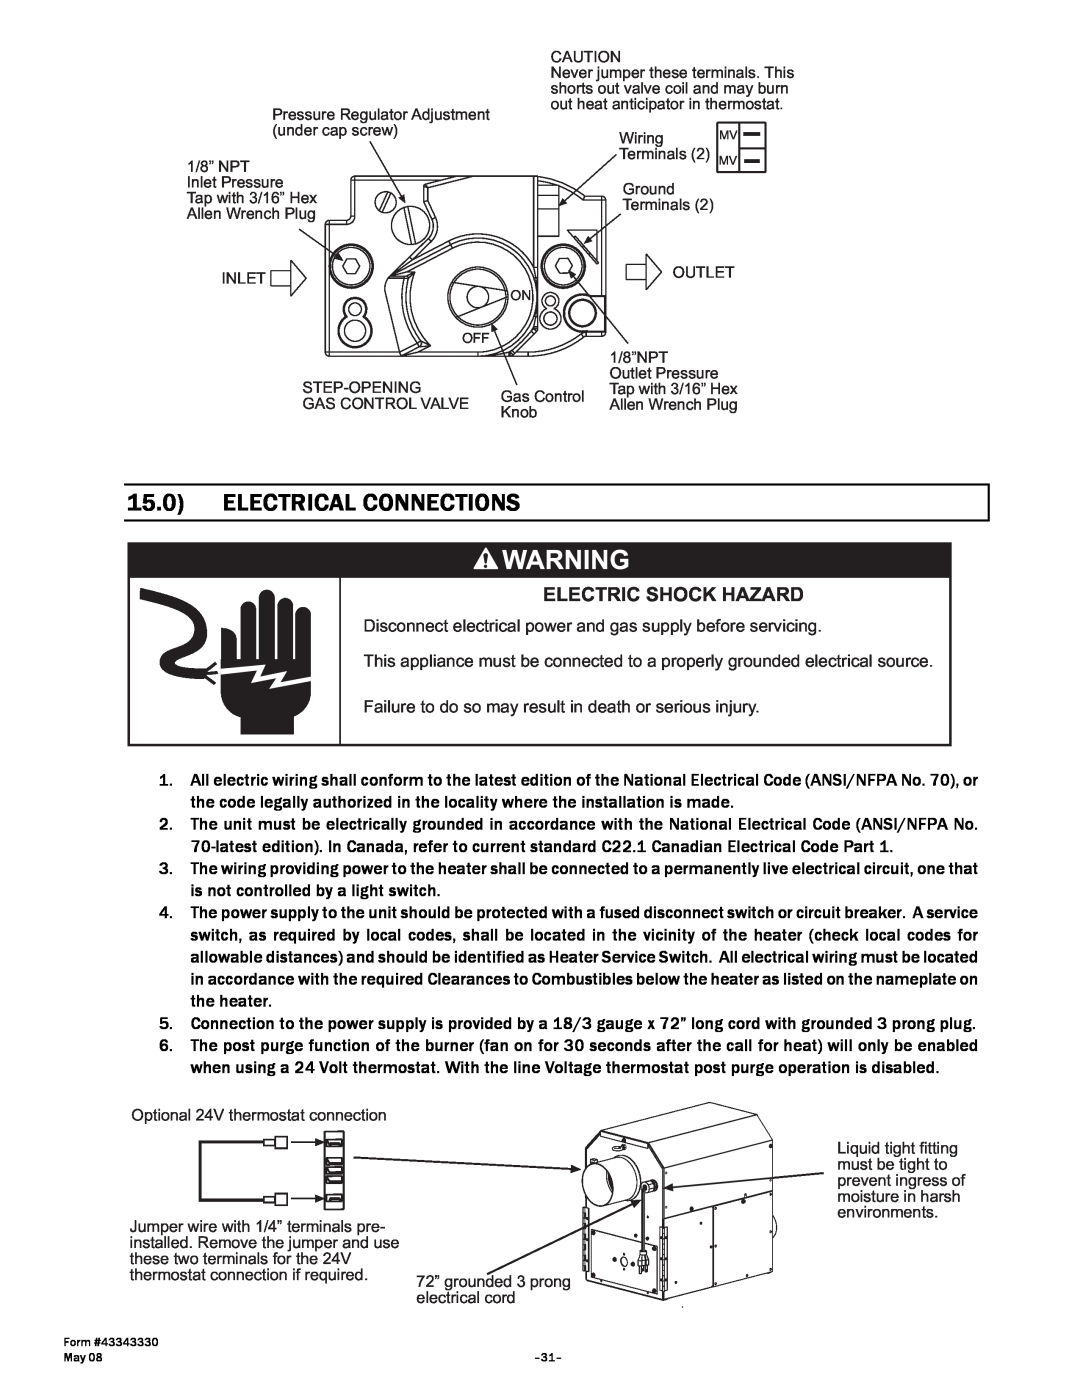 Gas-Fired Products PTS Series, PTU Series manual Electrical Connections, Electric Shock Hazard 